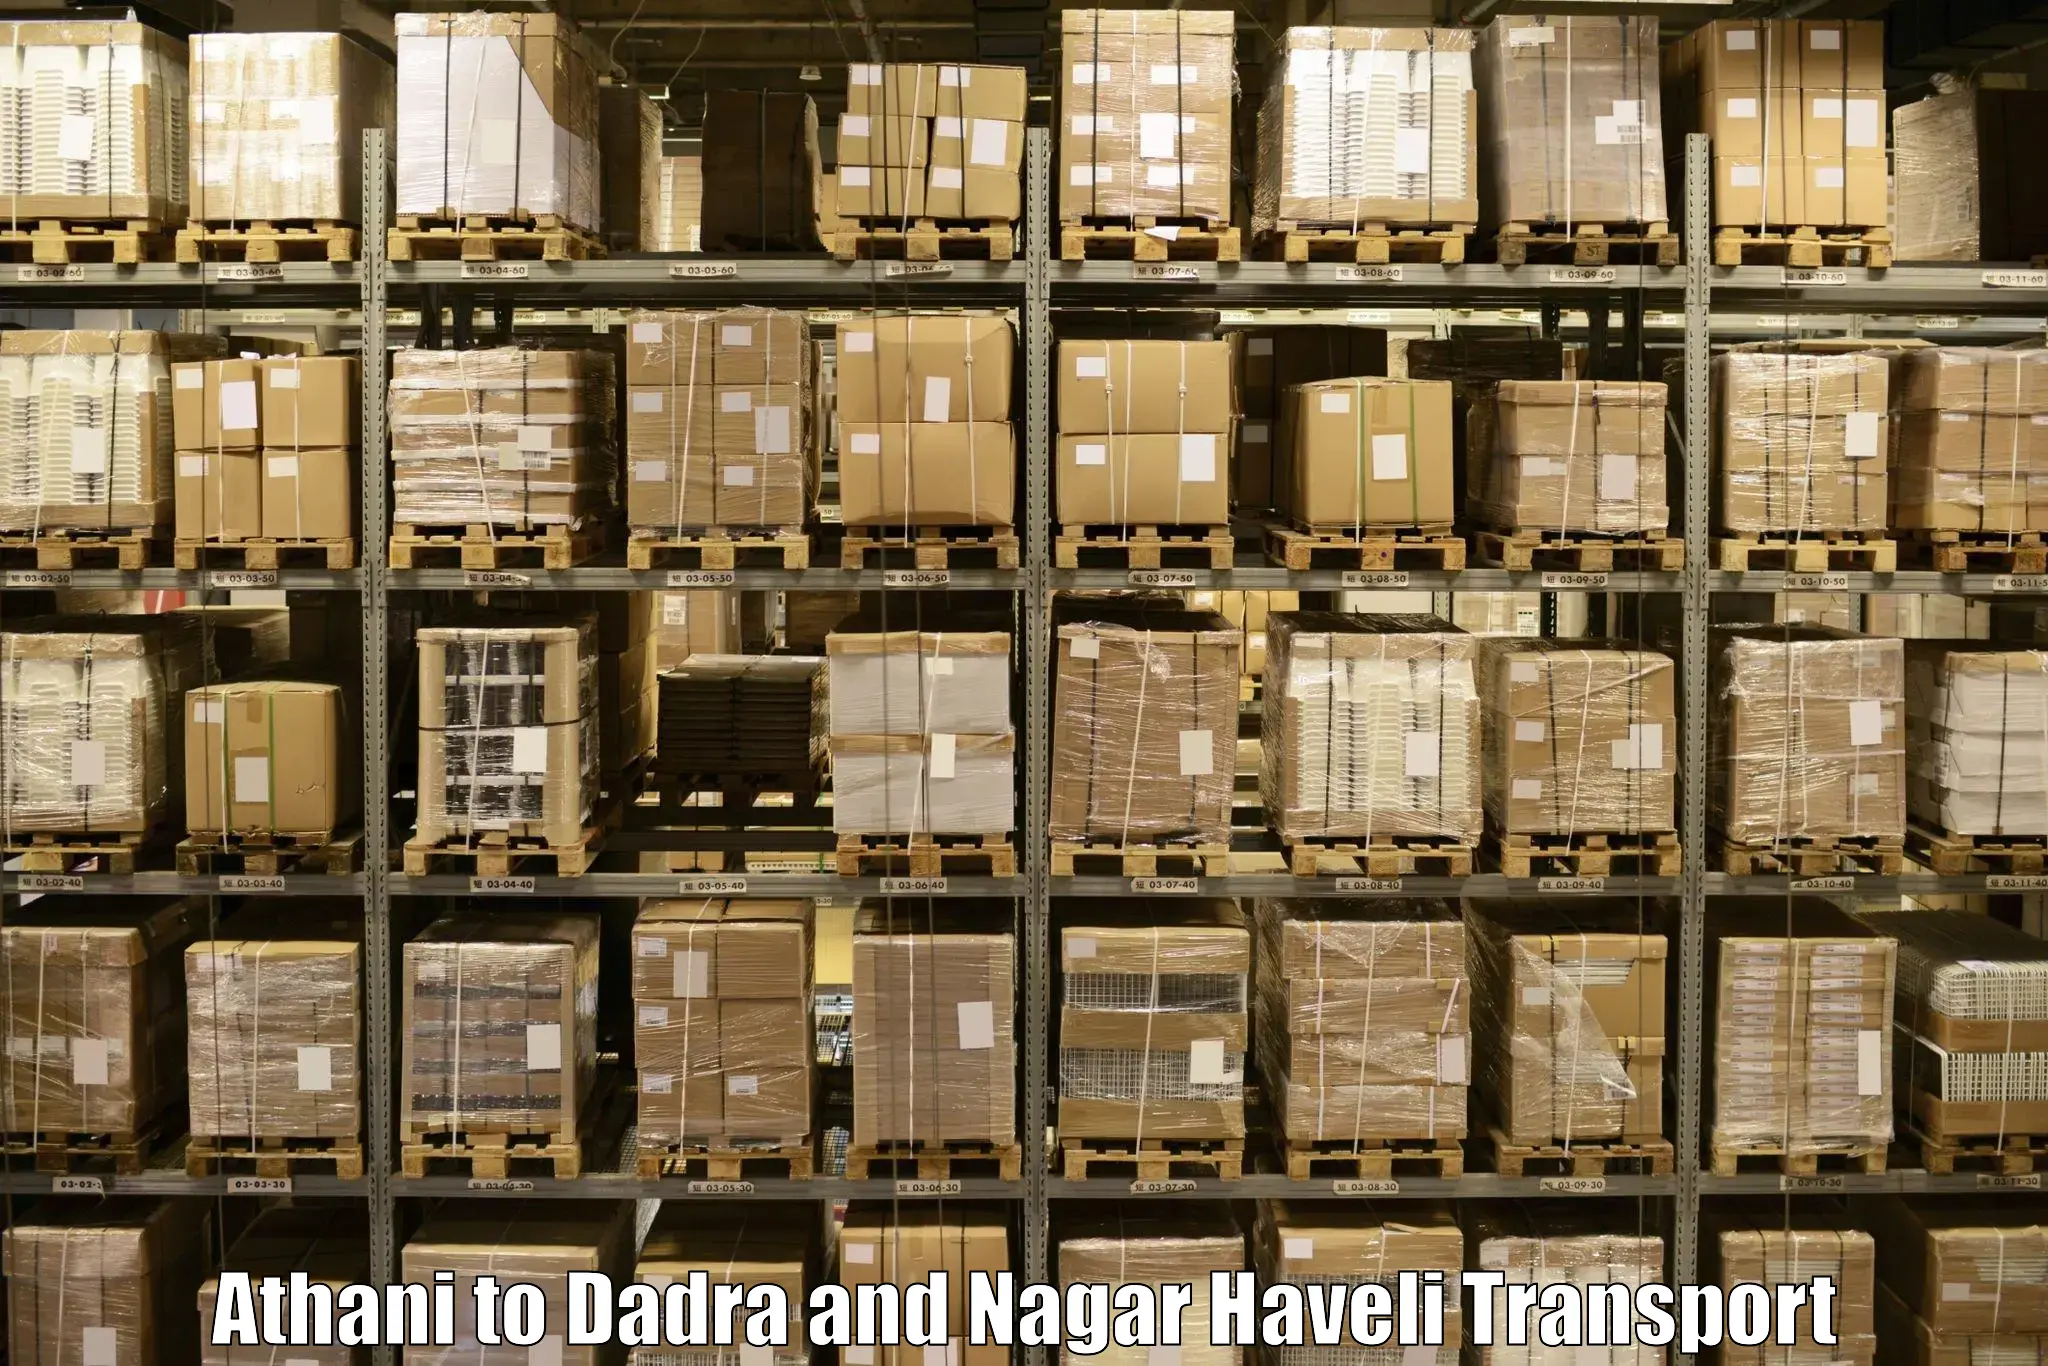 Cargo transportation services in Athani to Dadra and Nagar Haveli